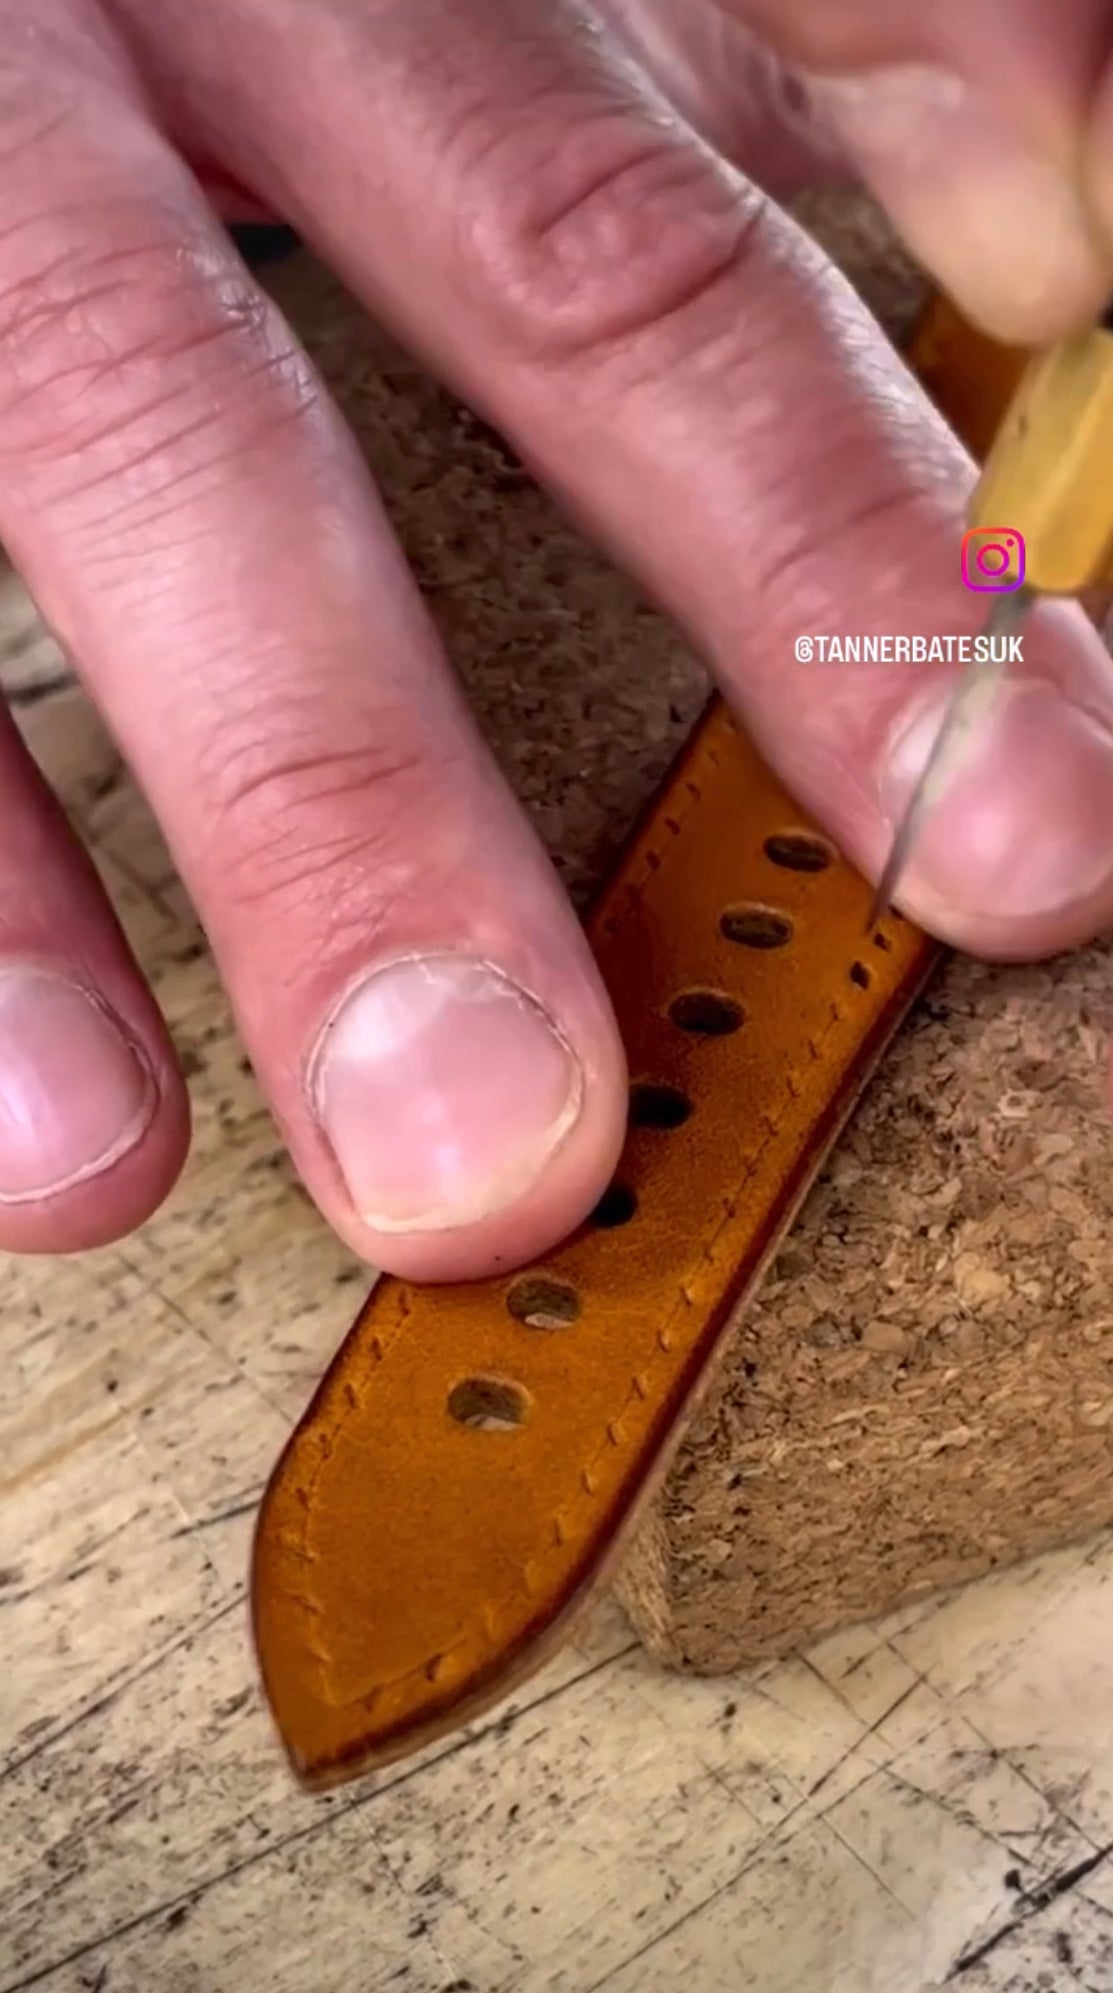 Hand Stitching Leather Video